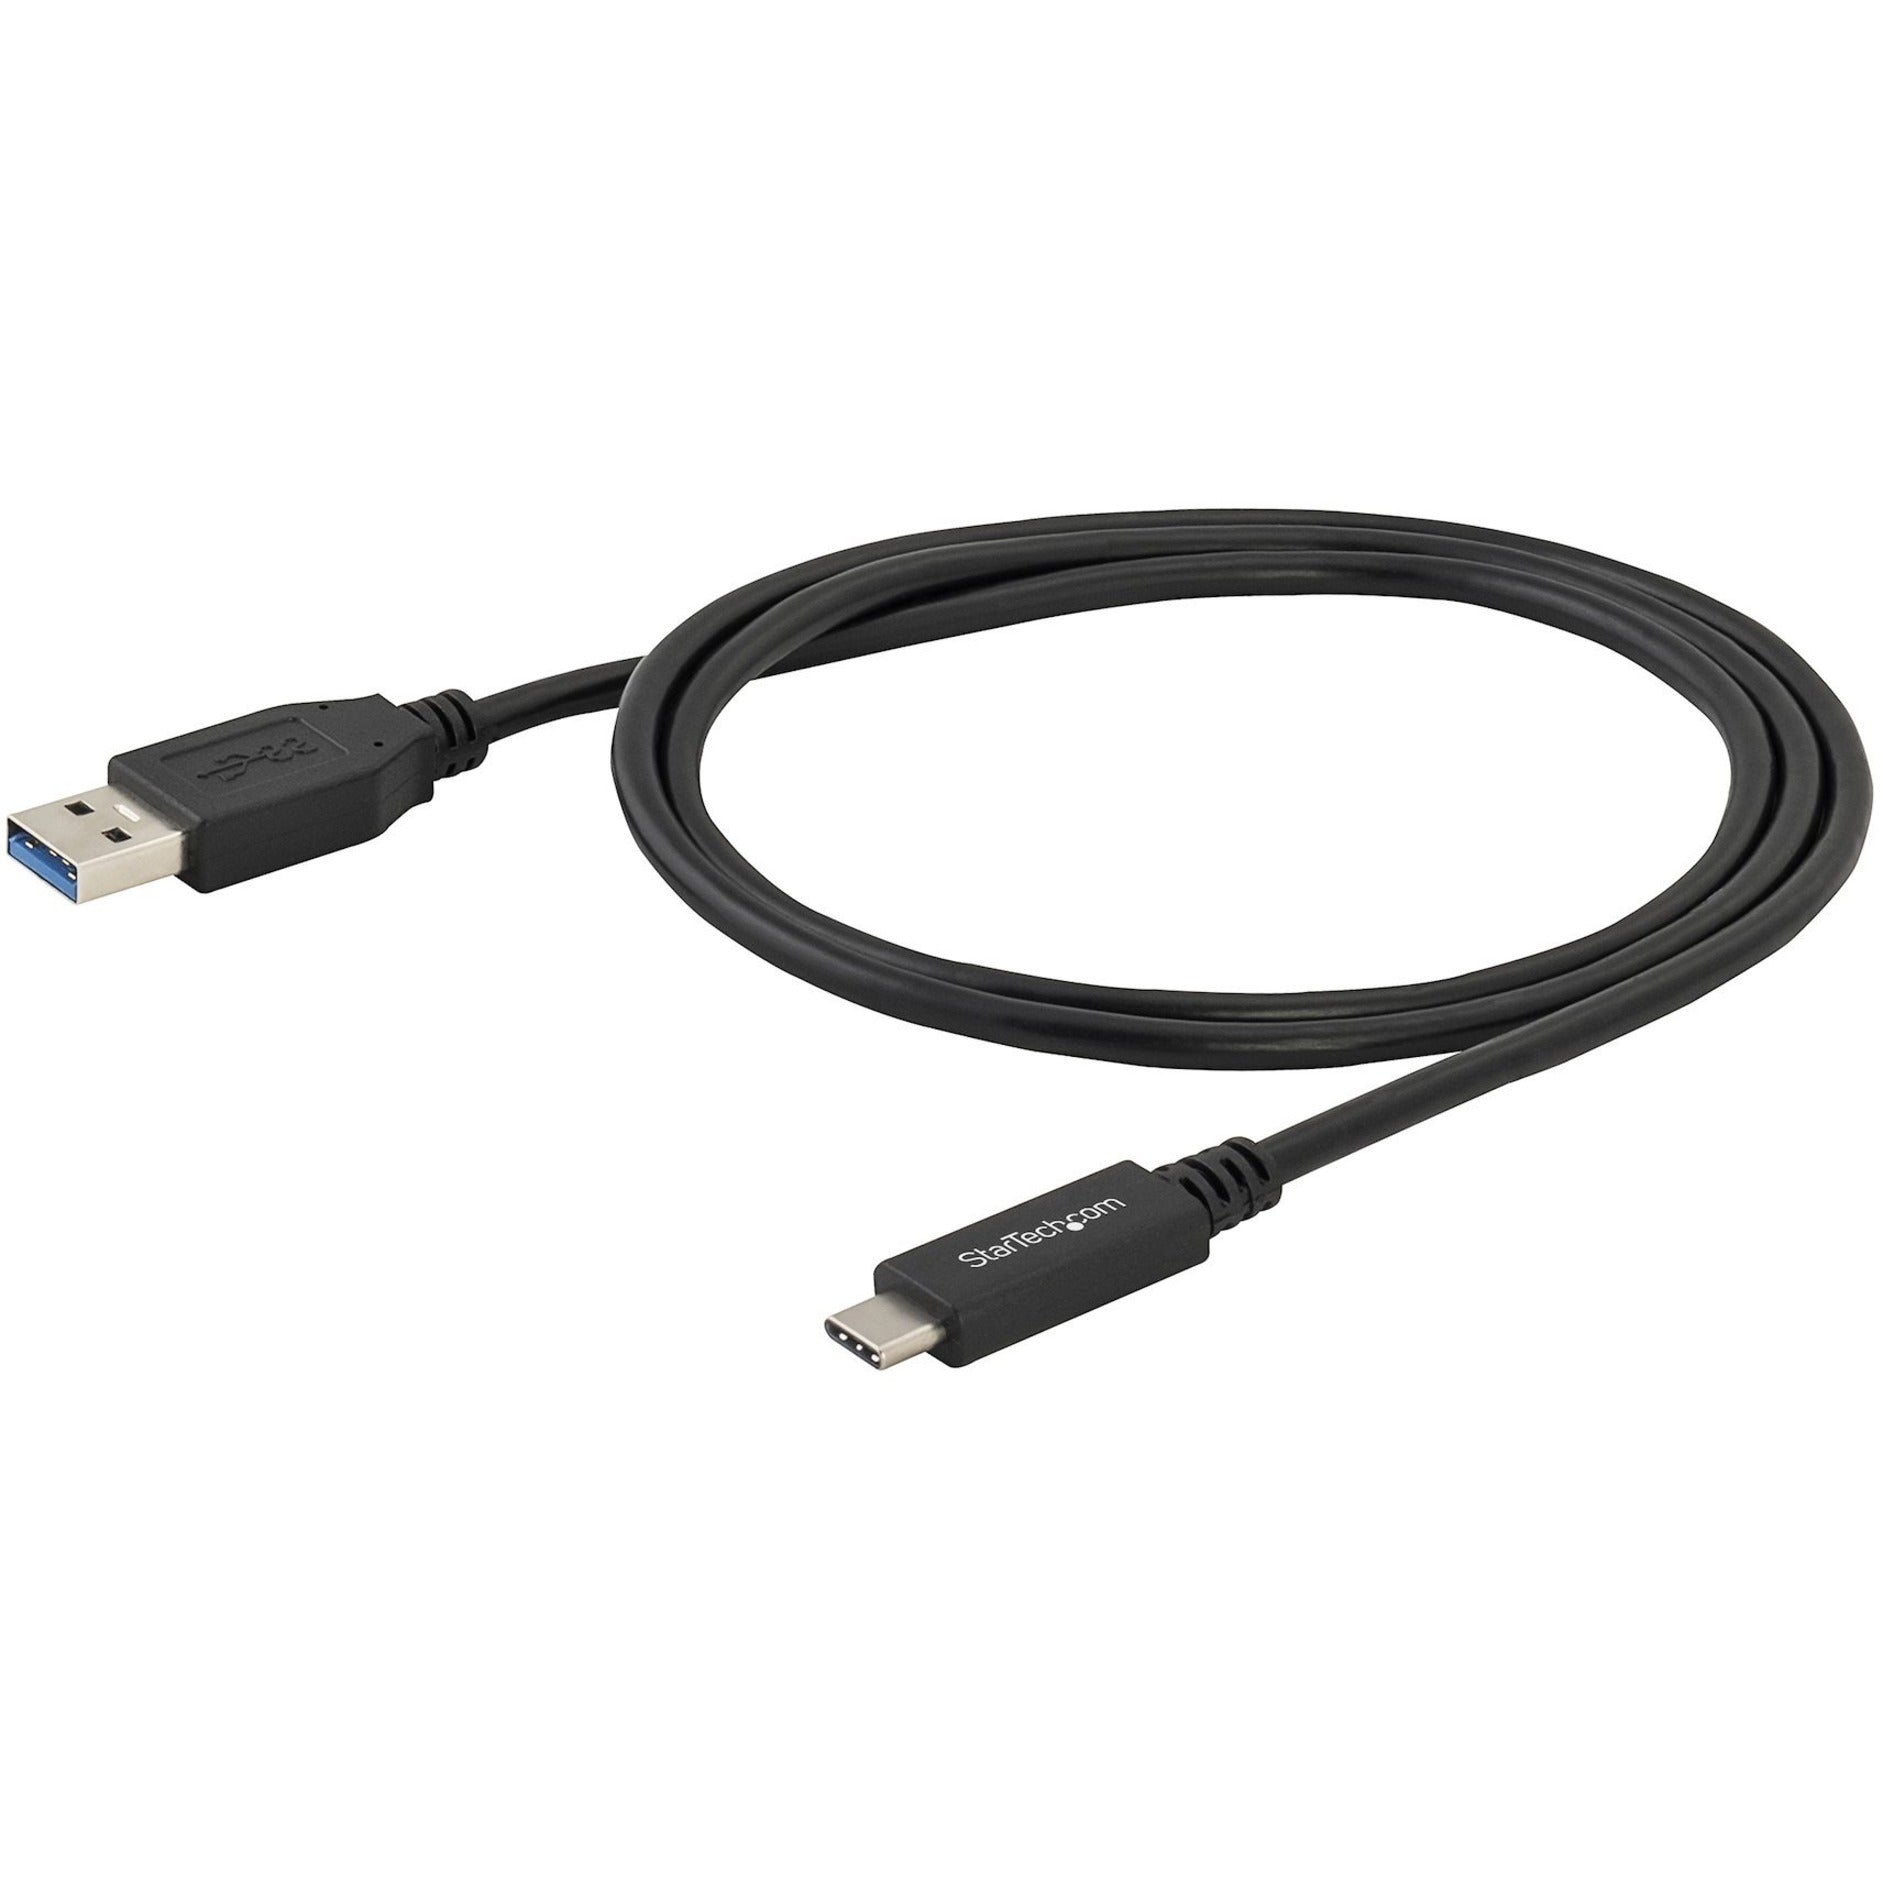 StarTech.com USB315AC1M USB to USB-C Cable - M/M - 1m / 3 ft - USB 3.0, 5Gbps, Charging